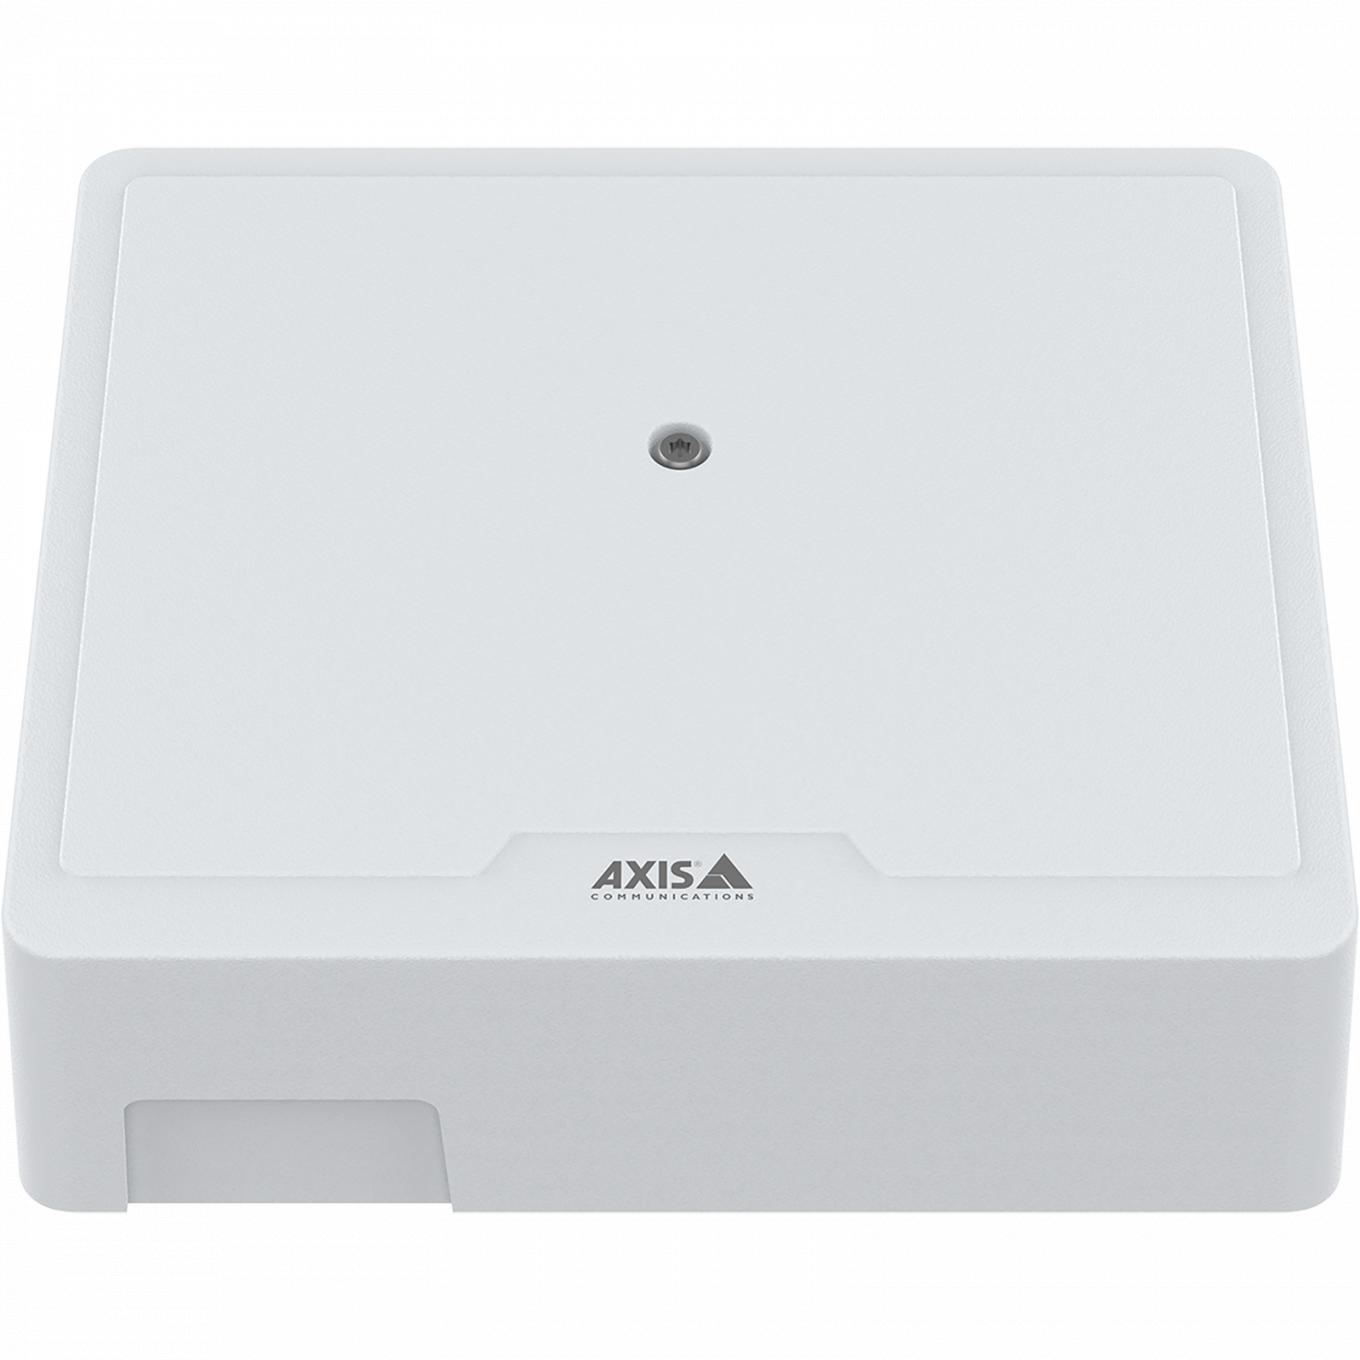 AXIS A1210 Network Door Controller, viewed from its front